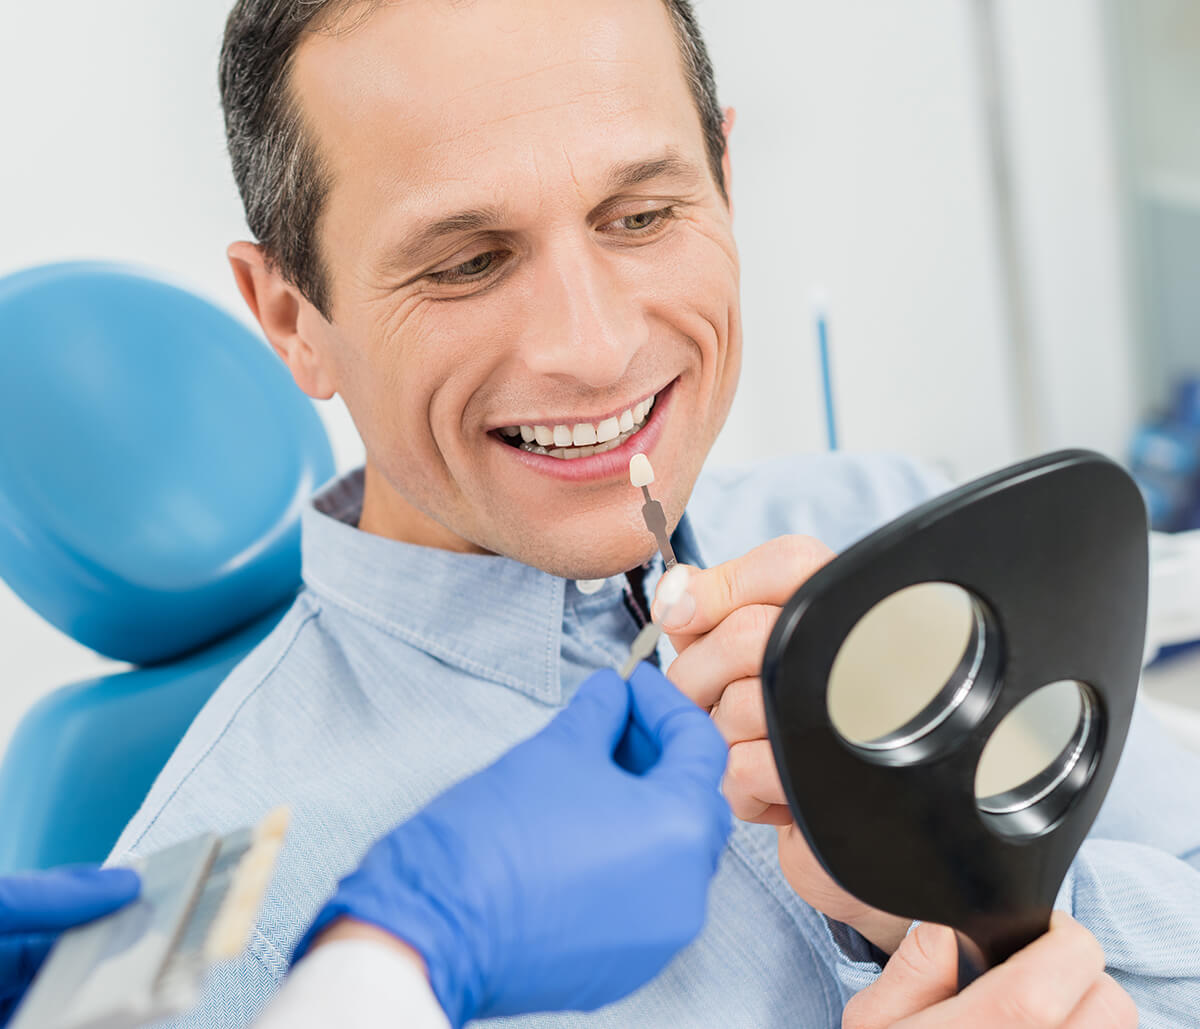 How Much Teeth Implants Cost in San Mateo Area